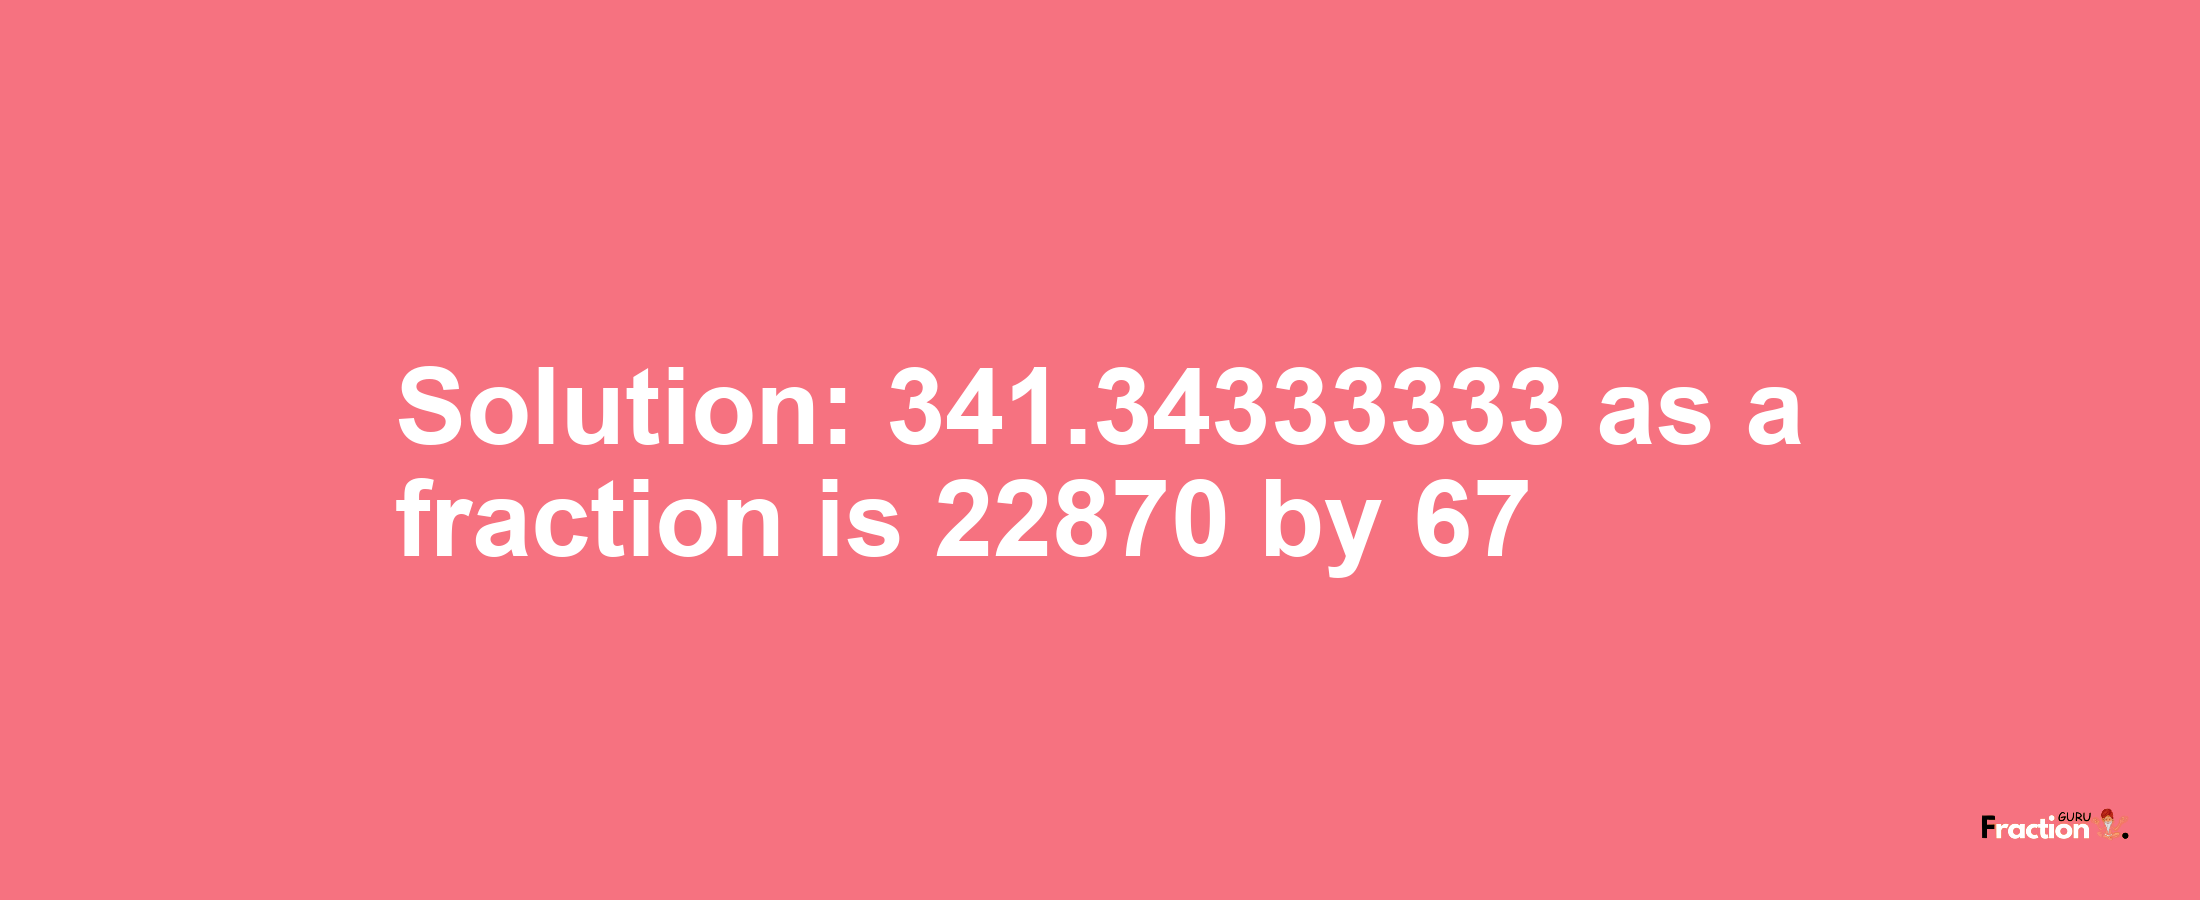 Solution:341.34333333 as a fraction is 22870/67